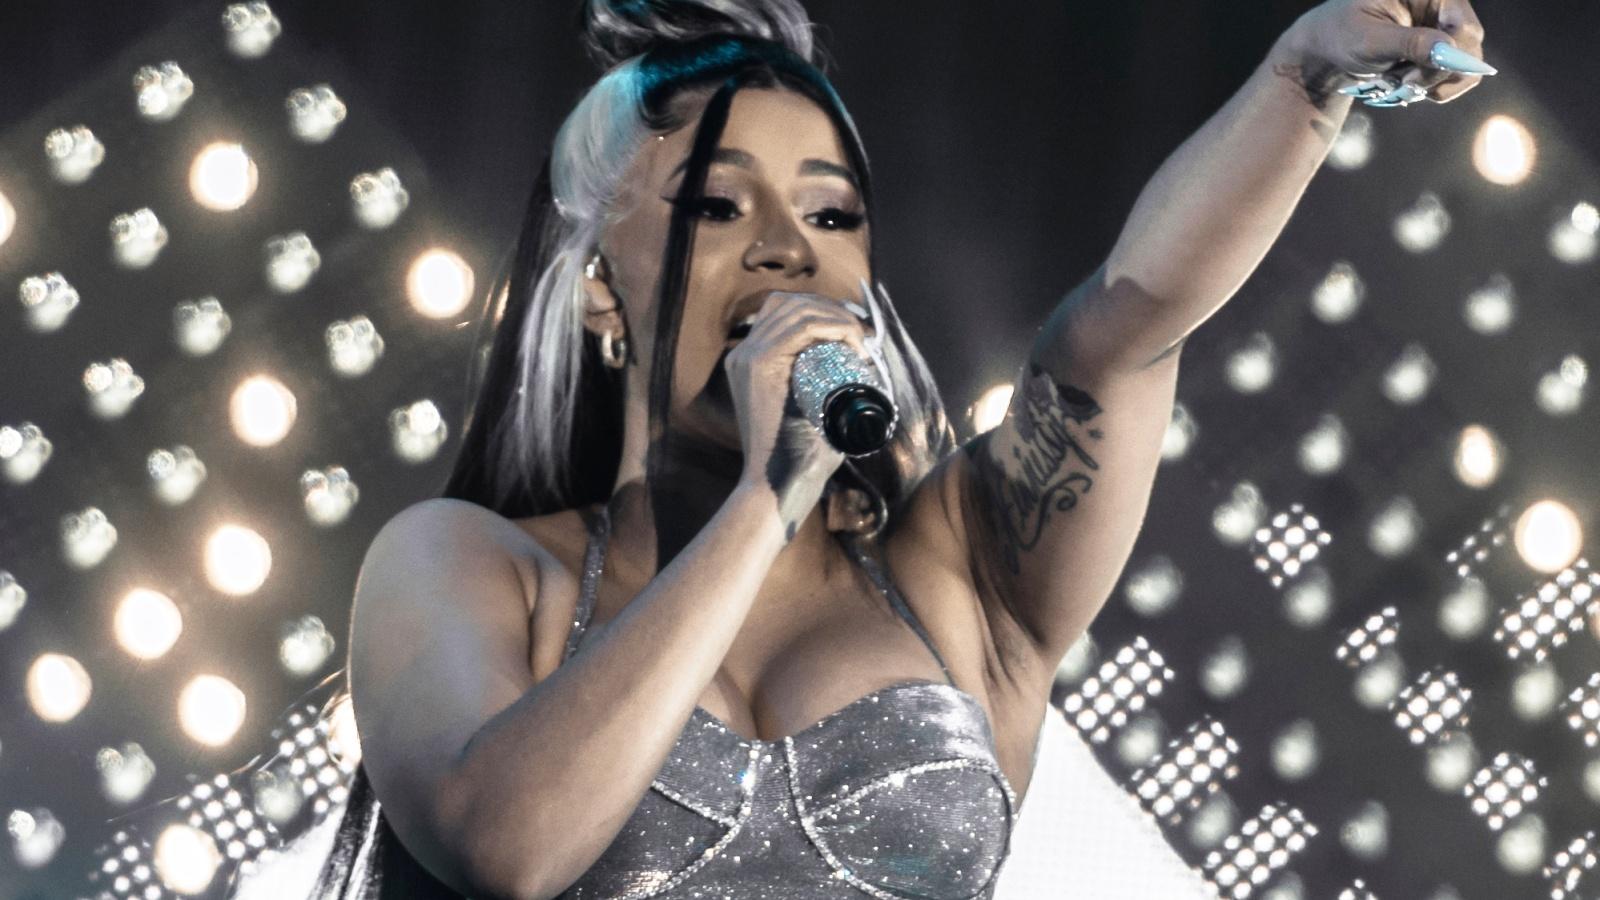 Cardi performing with an arm raised while performing onstage